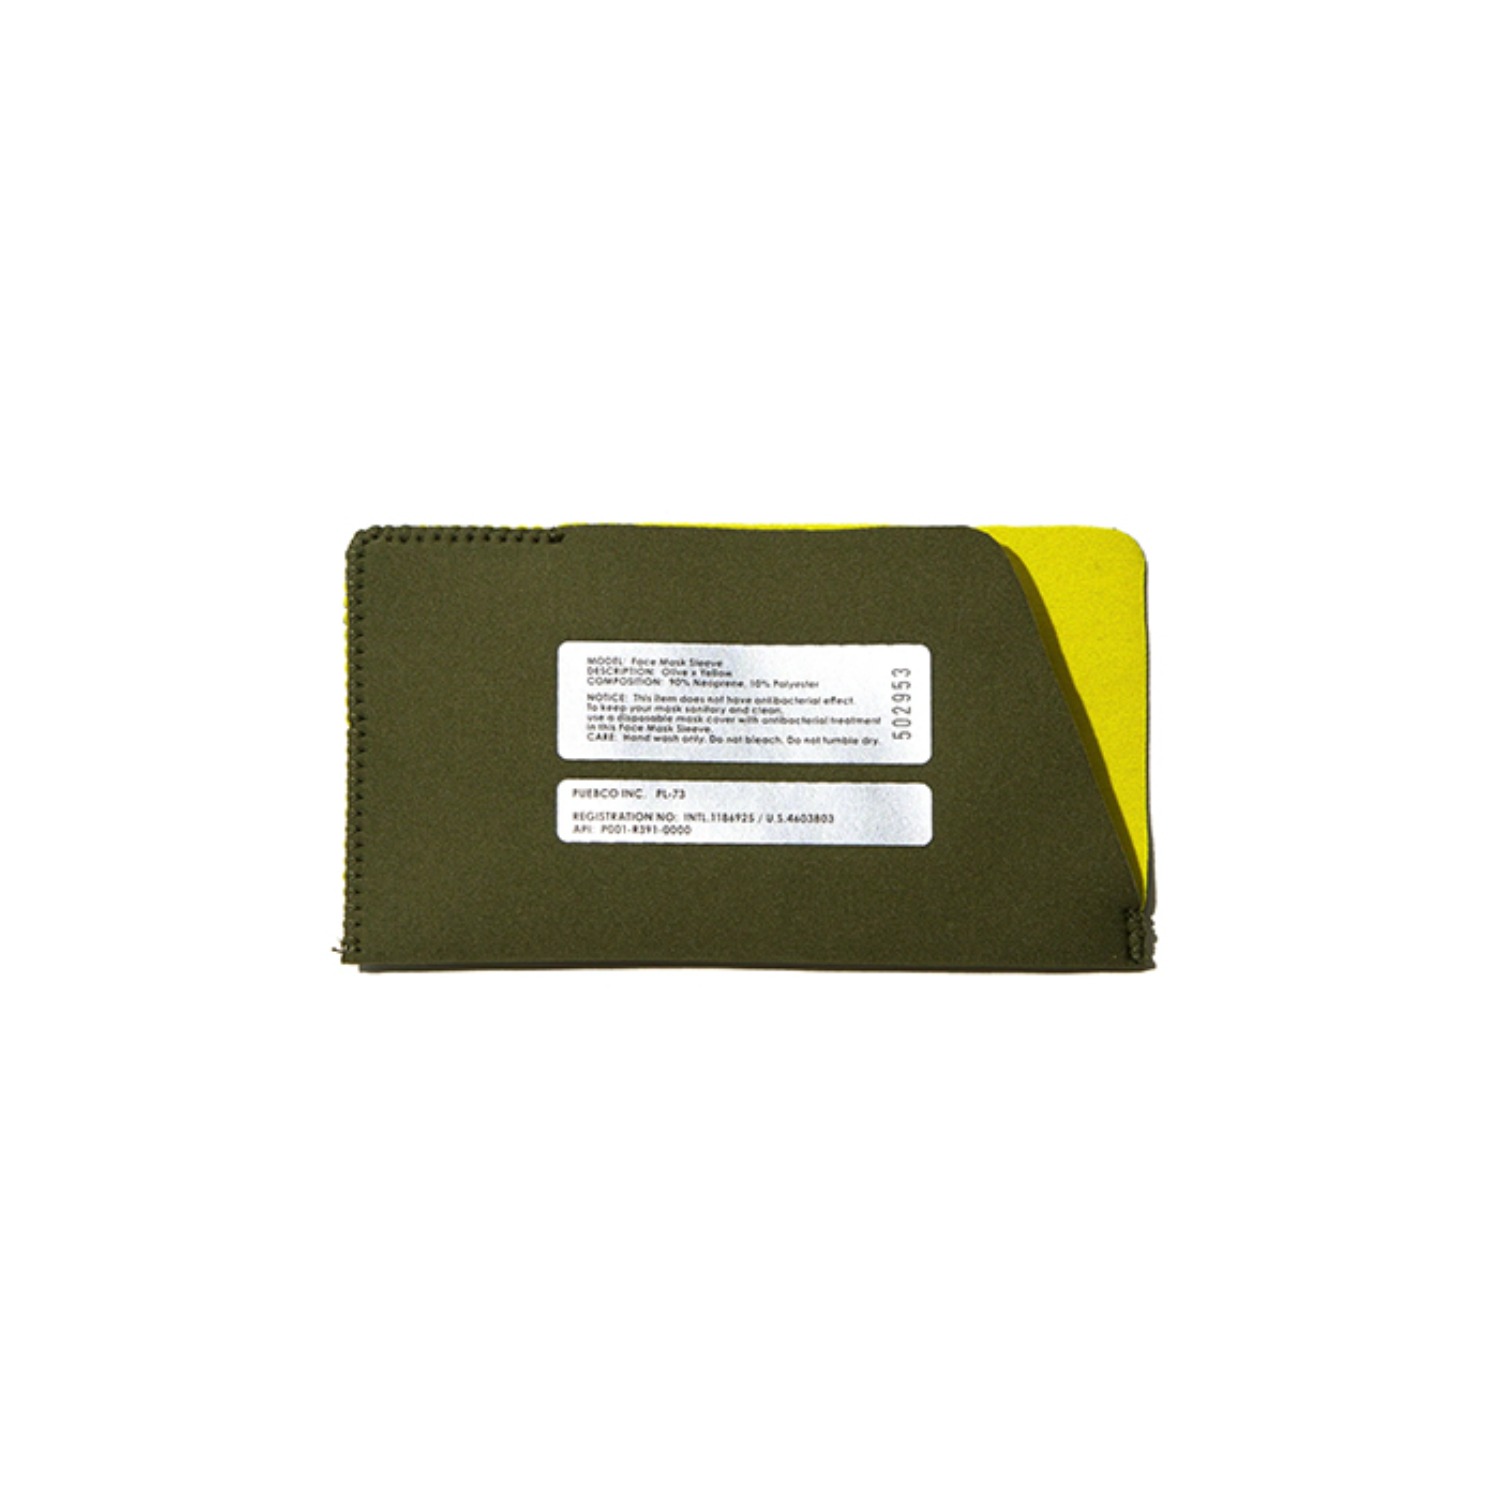 face mask sleeve / olive x yellow